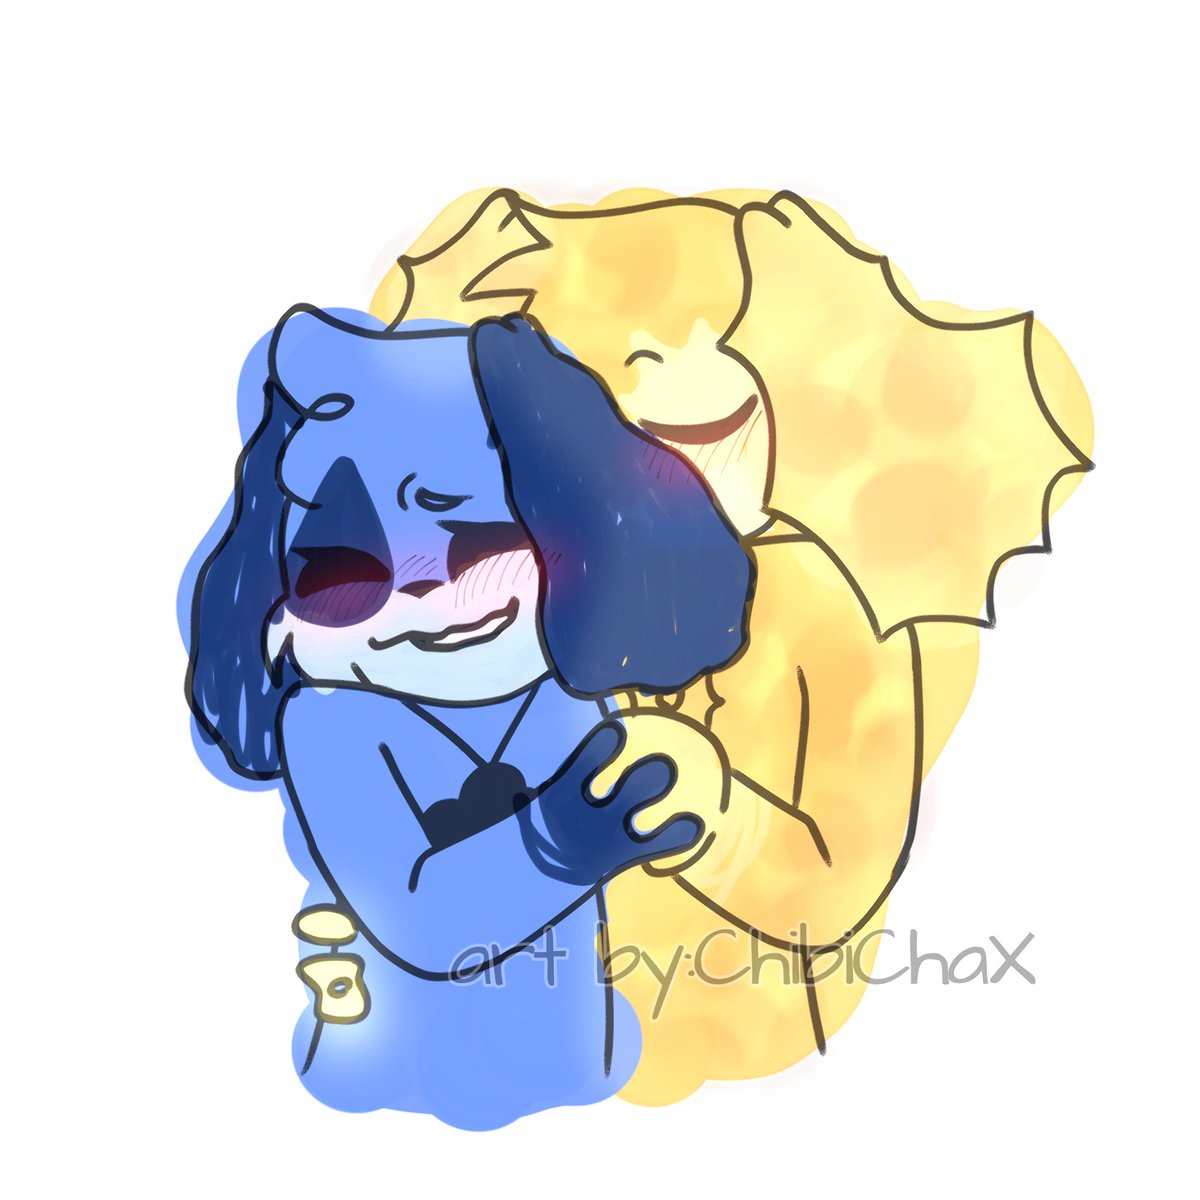 idk js him giving her kisses on her fluffy ear (it's ticklish)
blaming @pokatututoo for making me discover this ship, screw you /j /pos
#FrowningCrittersAU #OppositeCrittersAU #Rainyday #Rainydayship #Dogpressed #Daydog